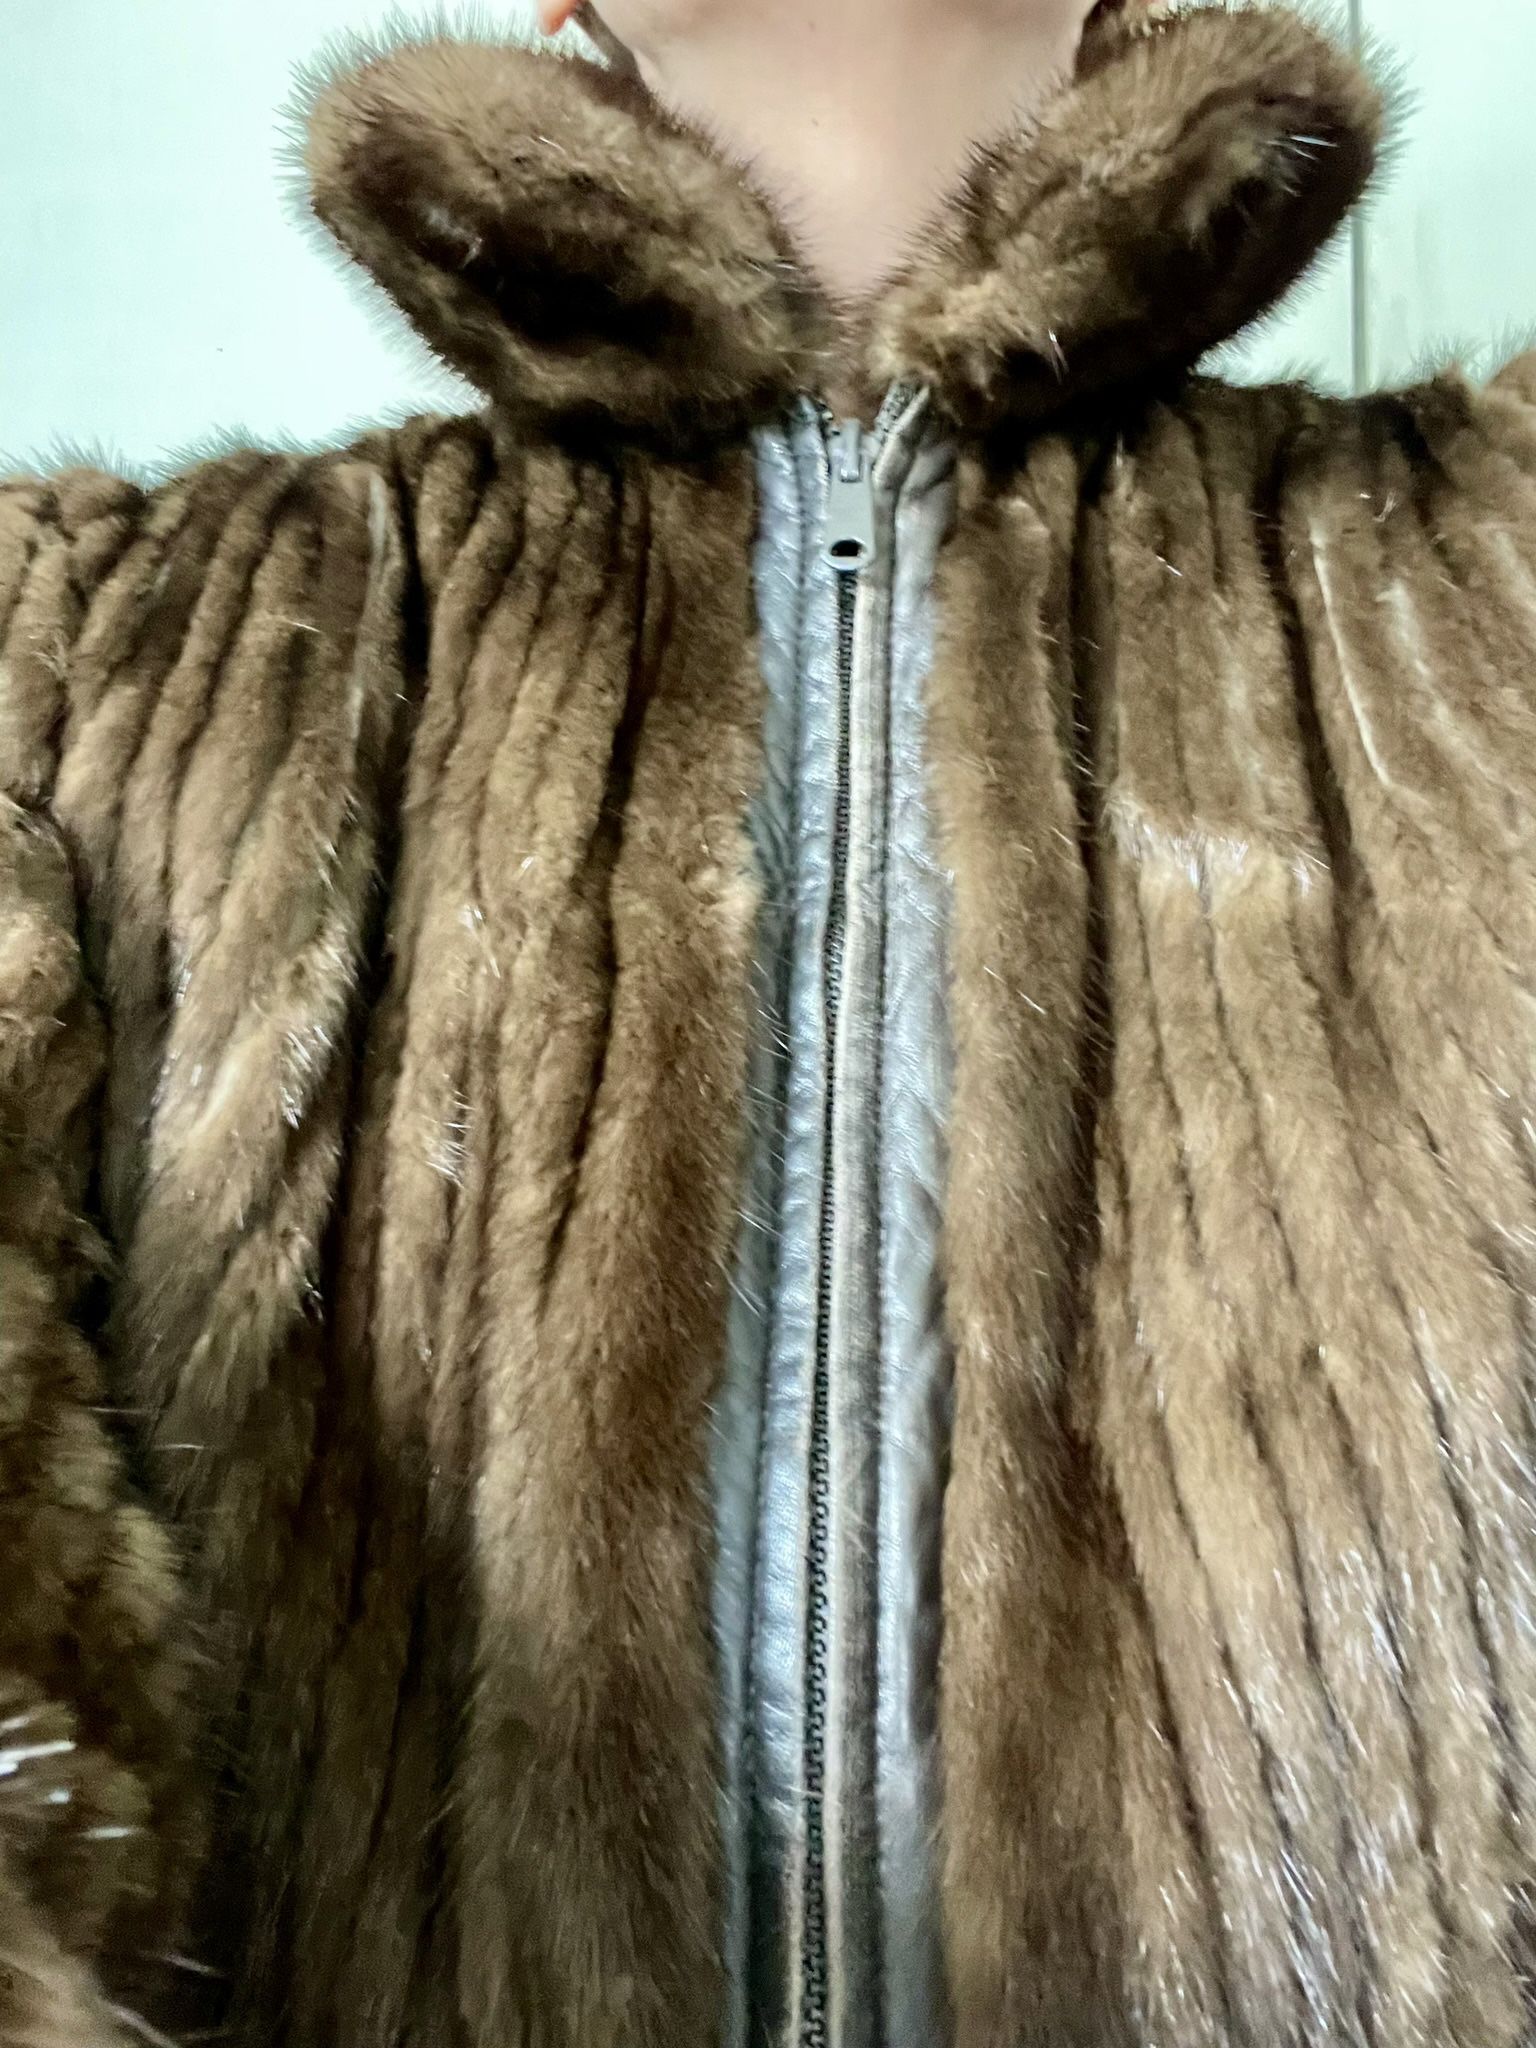 Vintage Fur And Leather Reversible Jacket - Verified Authentic